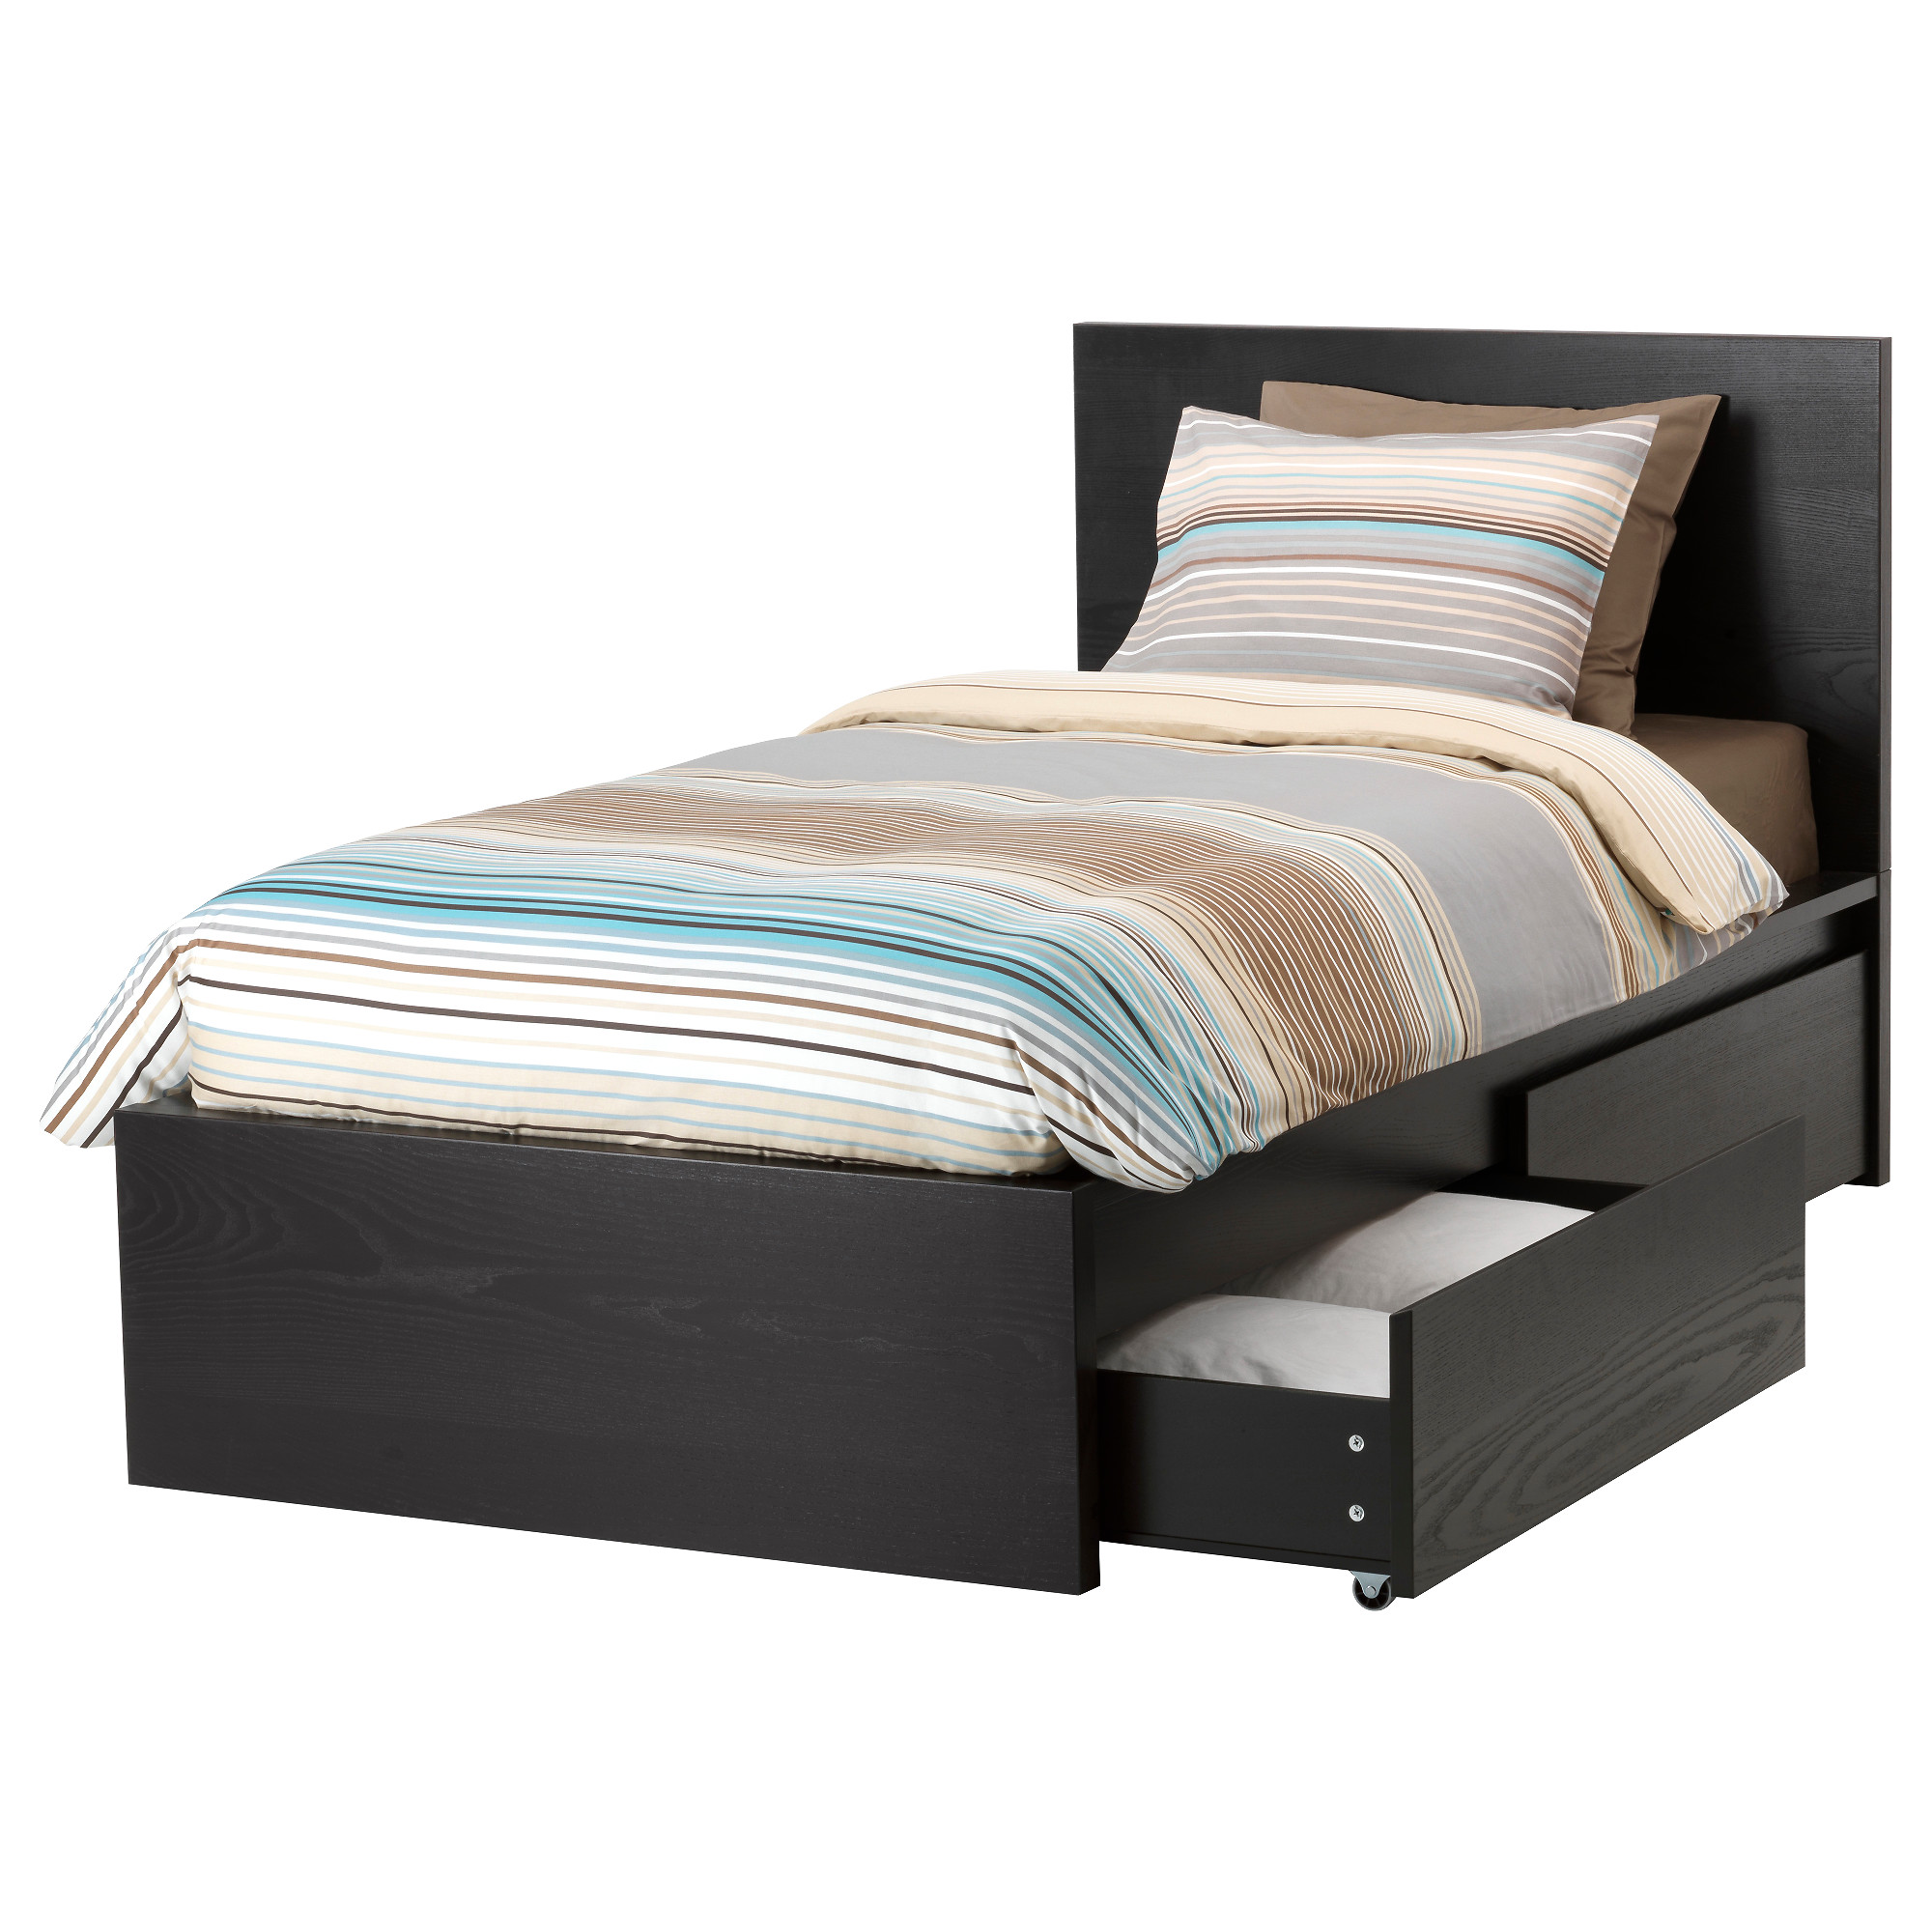 Cozy MALM high bed frame/2 storage boxes, black-brown, Luröy Height of cool twin bed frames